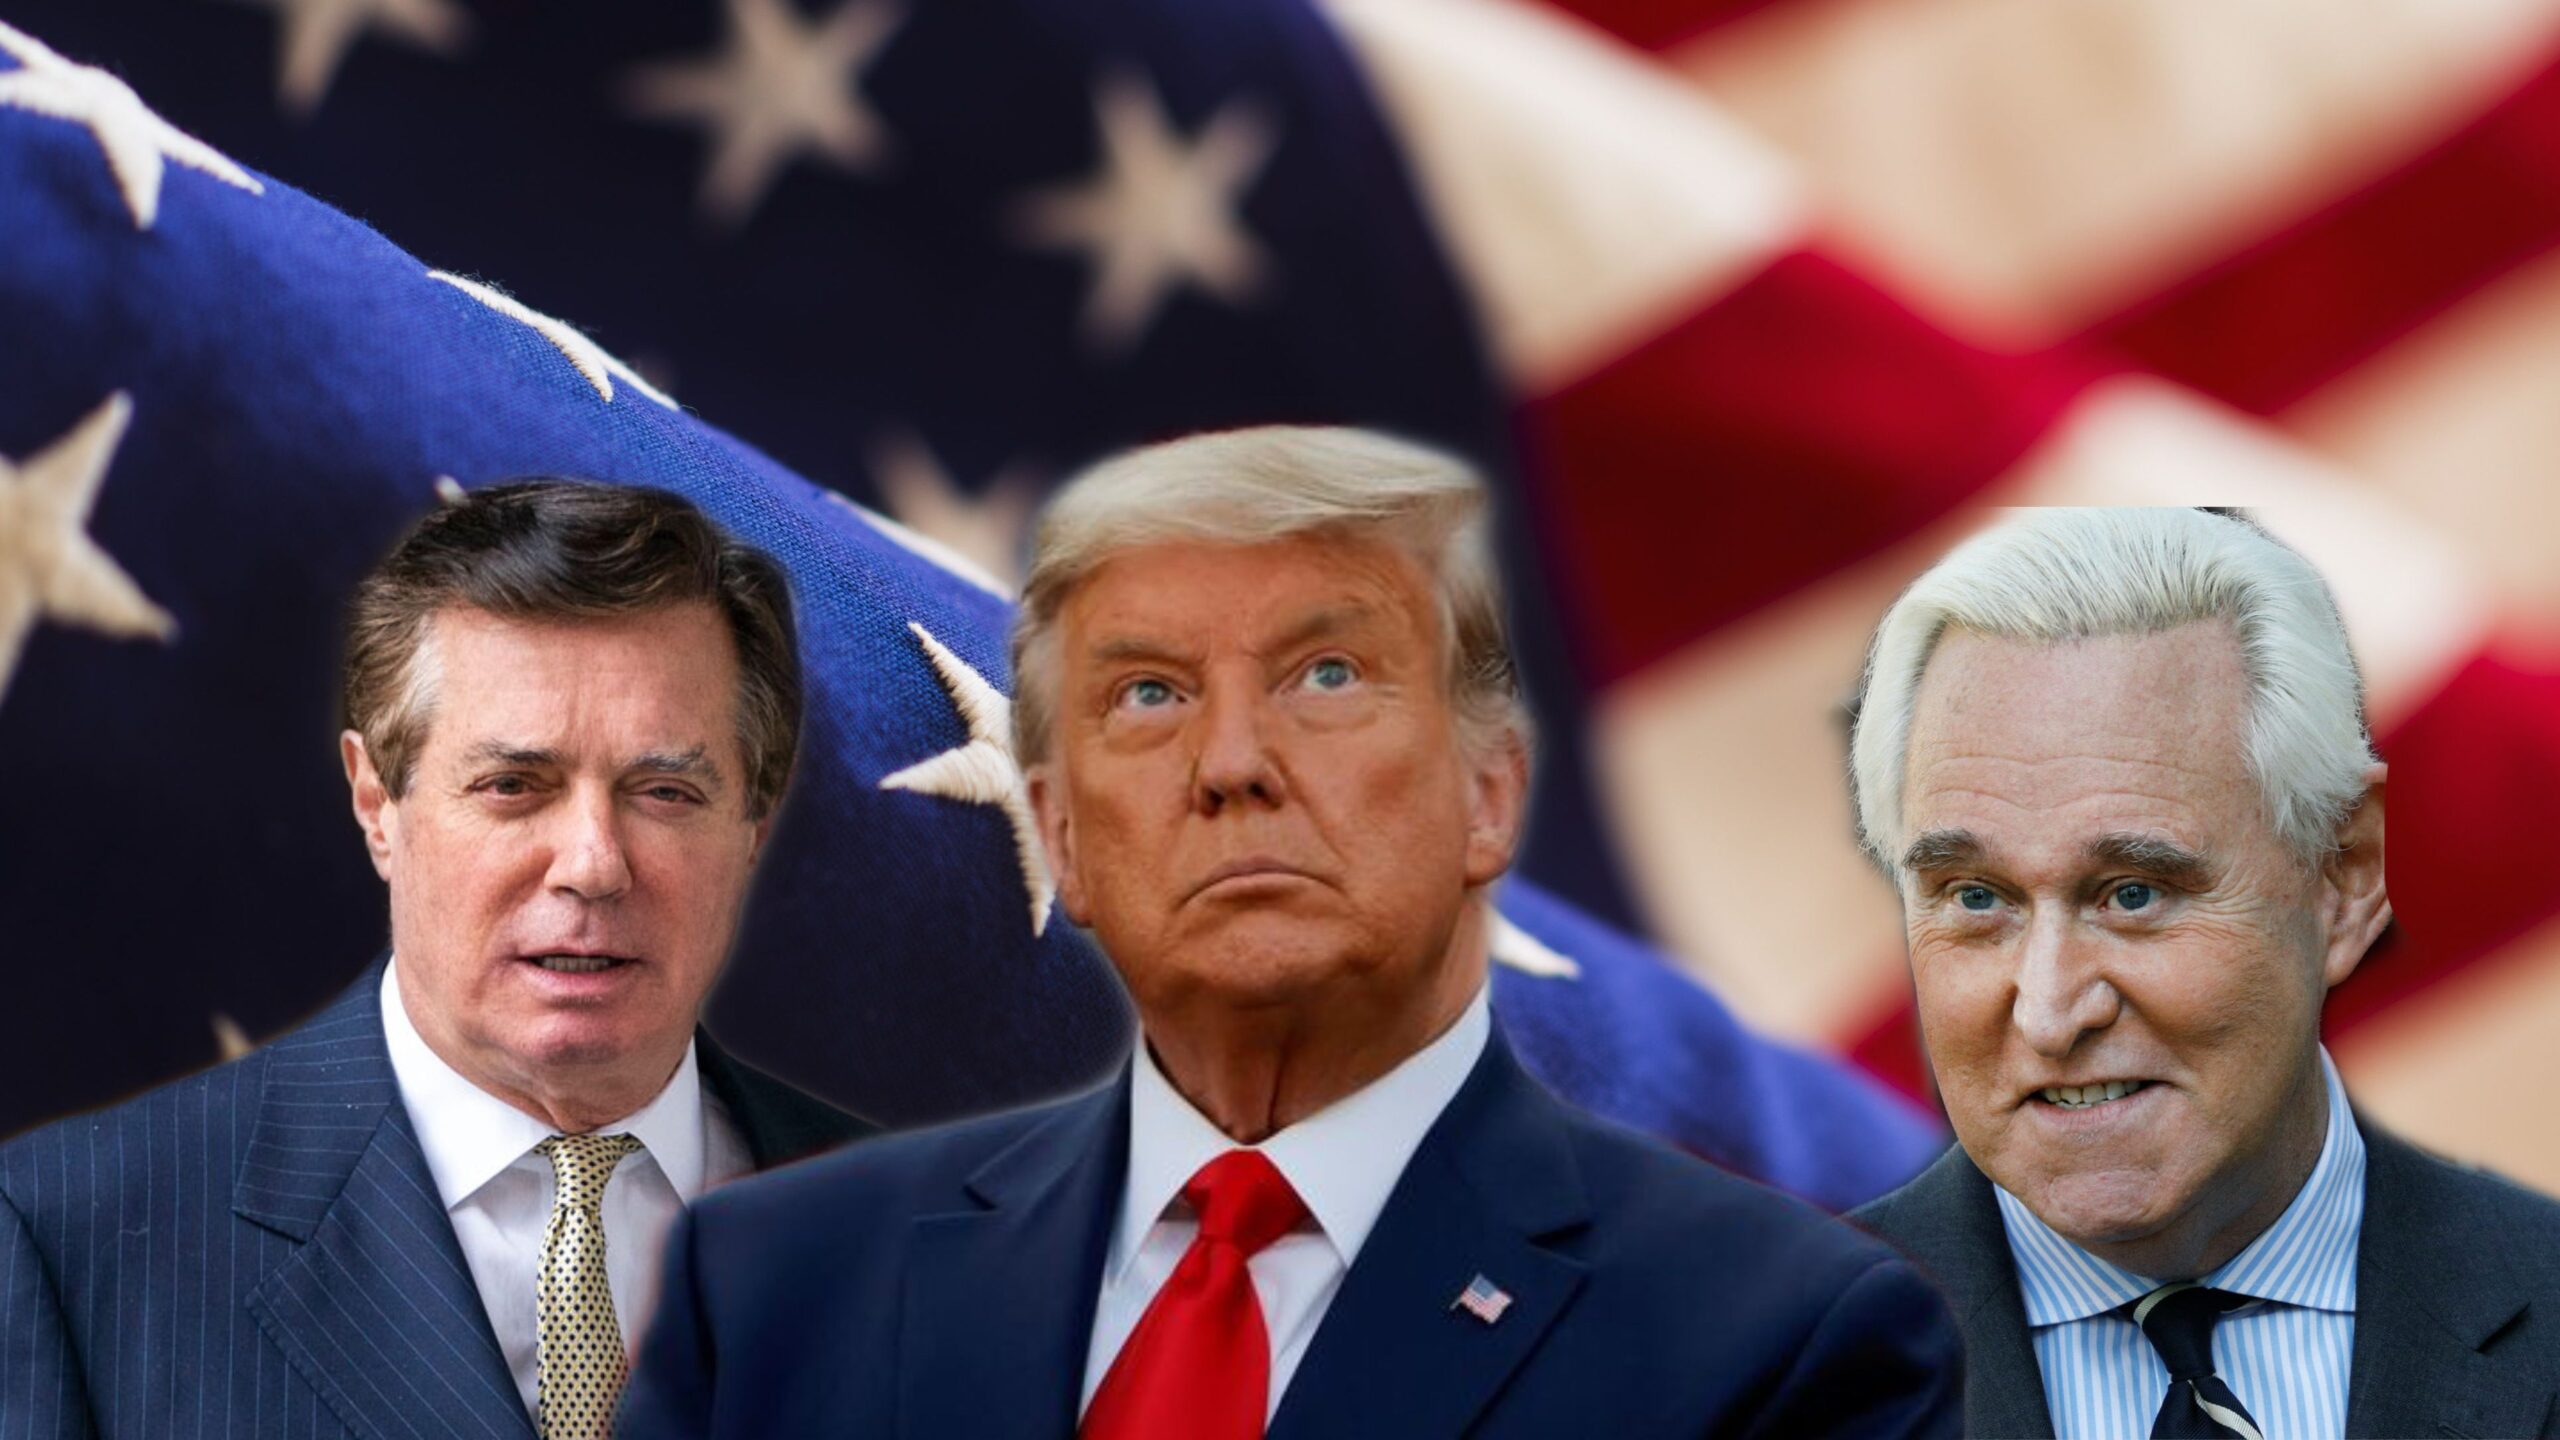 JUST IN: President Trump Announces 26 New Christmas Pardons Including Paul Manafort and Roger Stone | The Gateway Pundit | by Cristina Laila